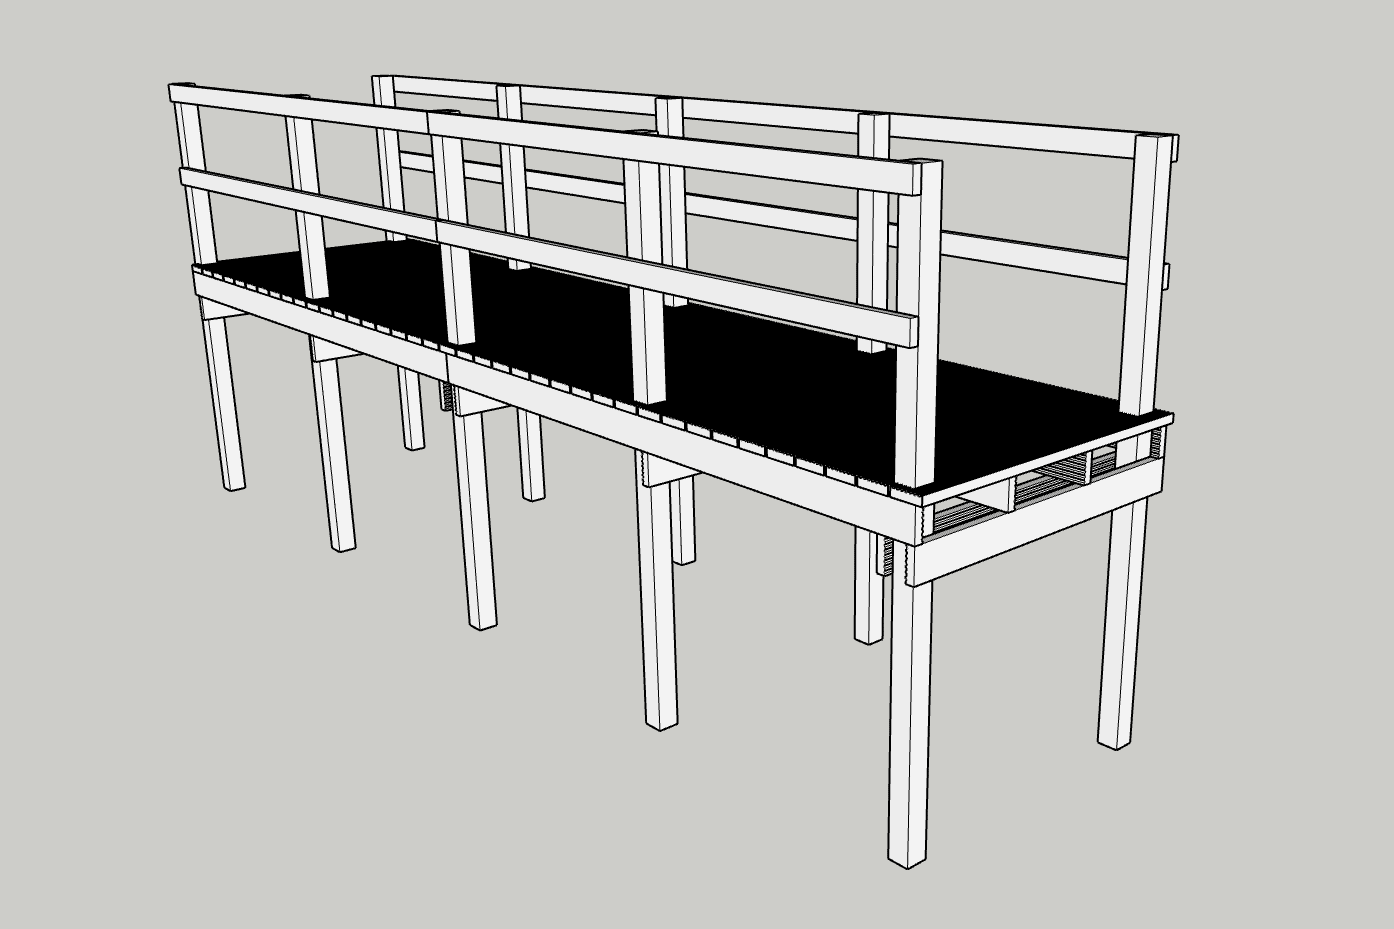 Sketchup drawing showing the three-quarter view of a typical 1500mm wide British Recycled Plastic boardwalk with handrails.